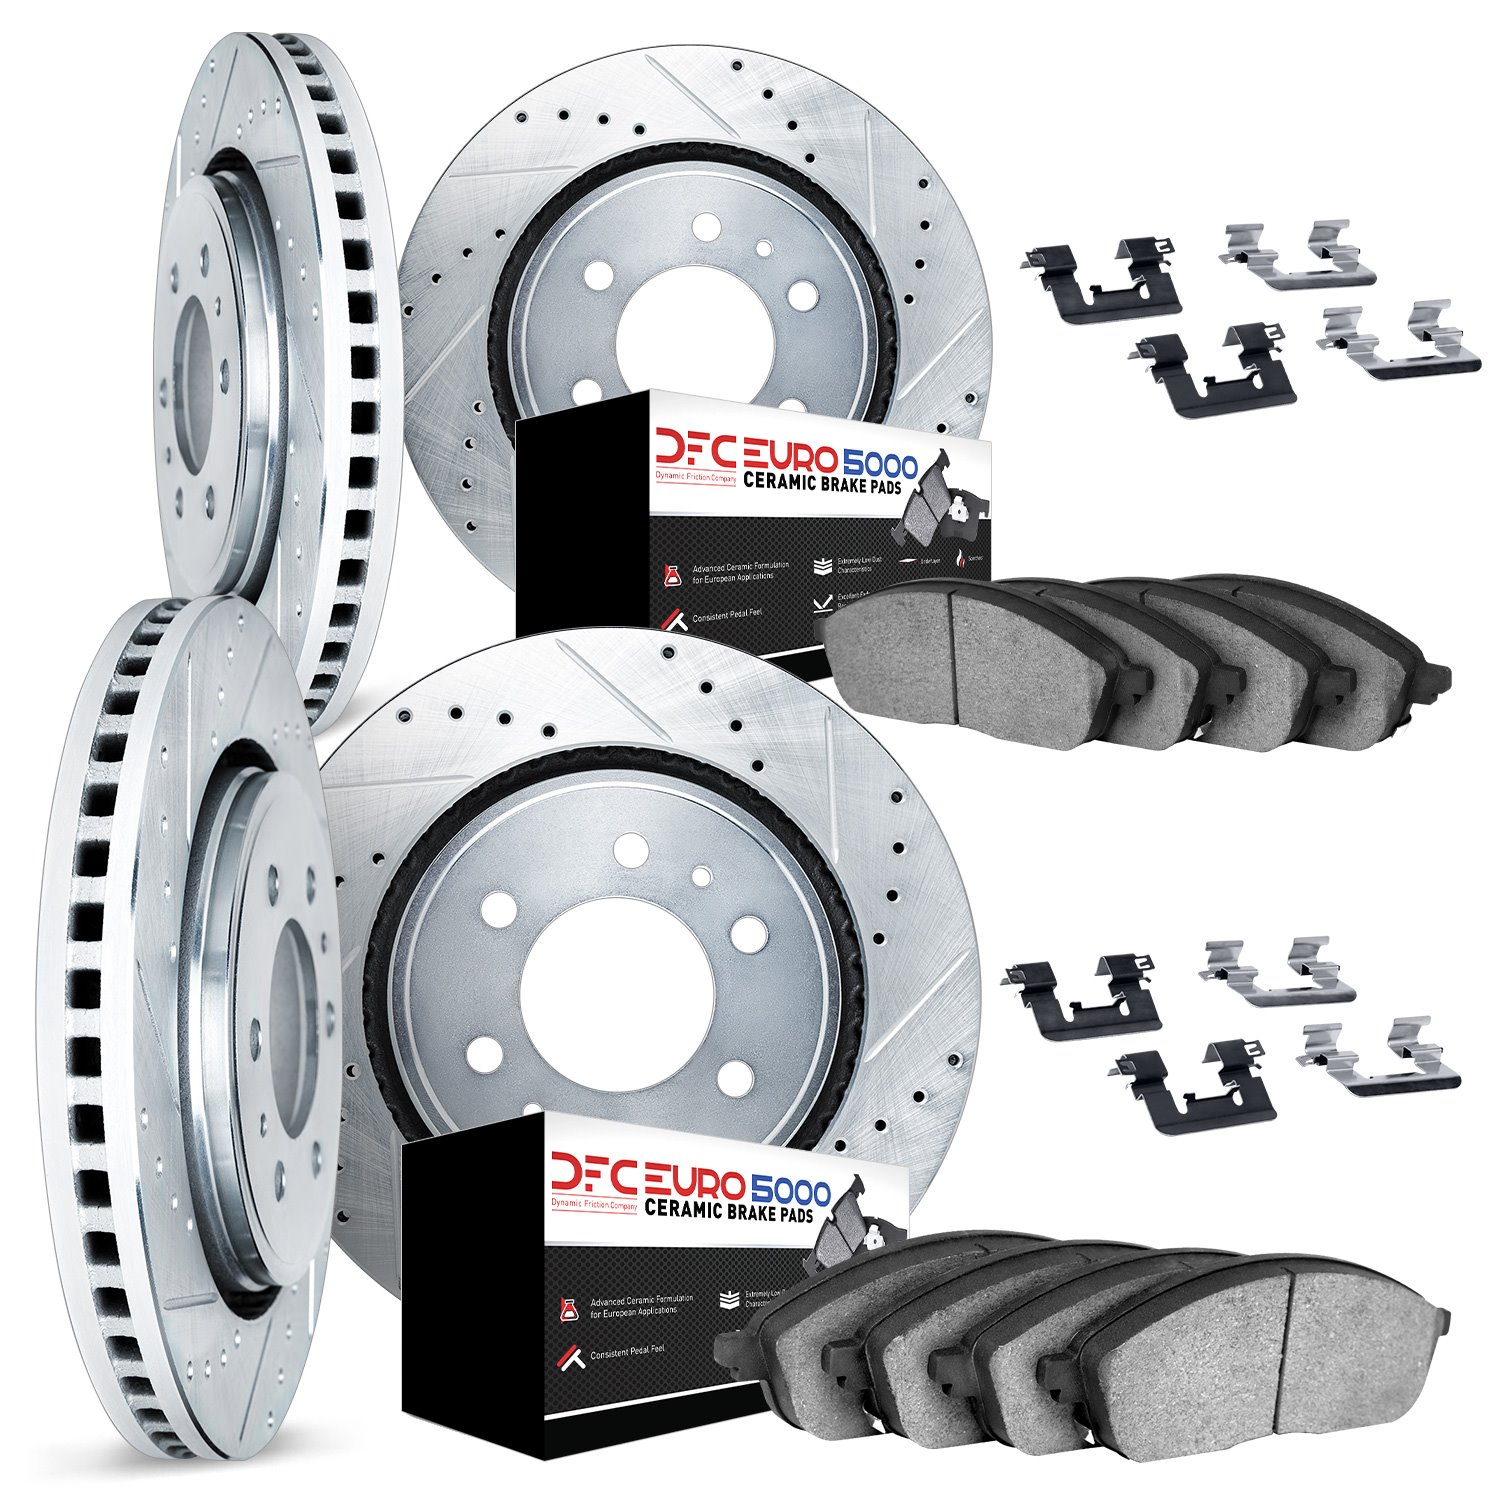 7614-47000 Drilled/Slotted Brake Rotors w/5000 Euro Ceramic Brake Pads Kit & Hardware [Silver], 2006-2009 GM, Position: Front an